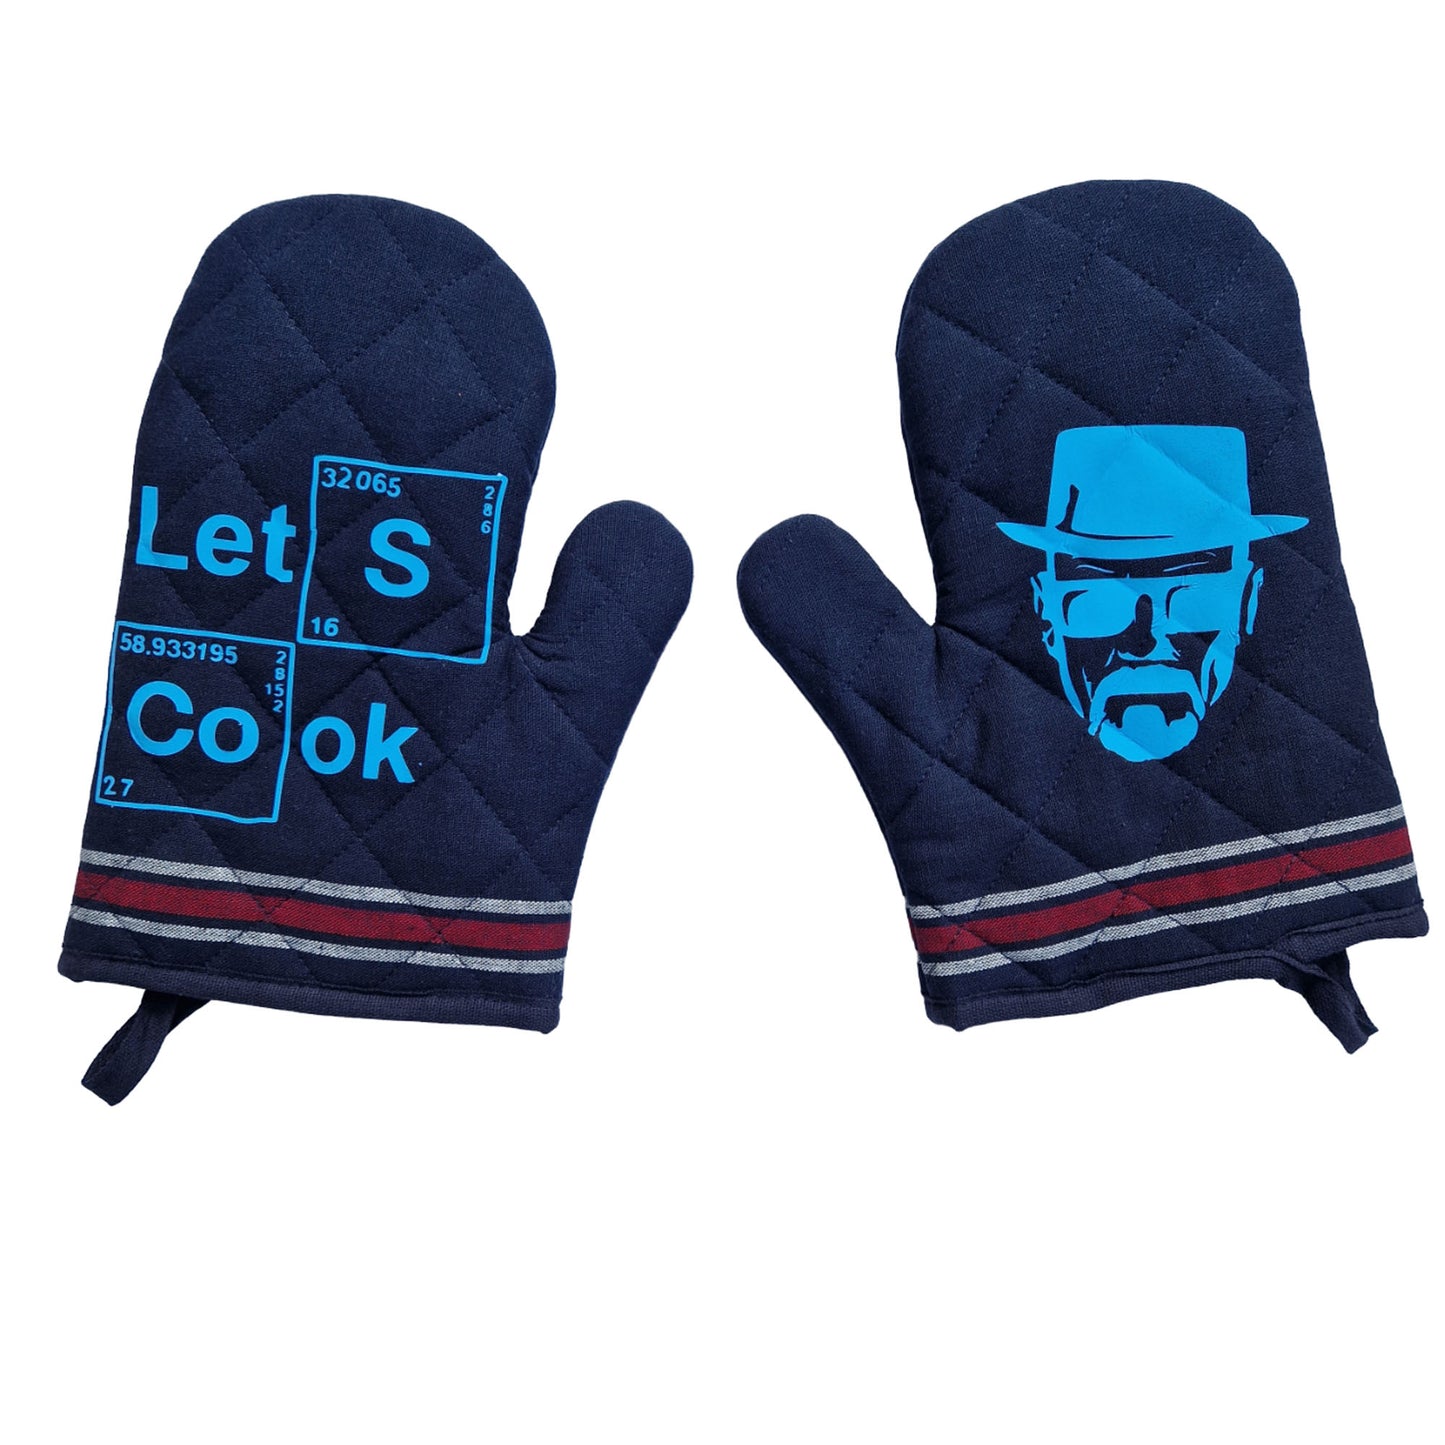 both blue sides present pair of oven gloves breaking bad memorabilia for kitchen